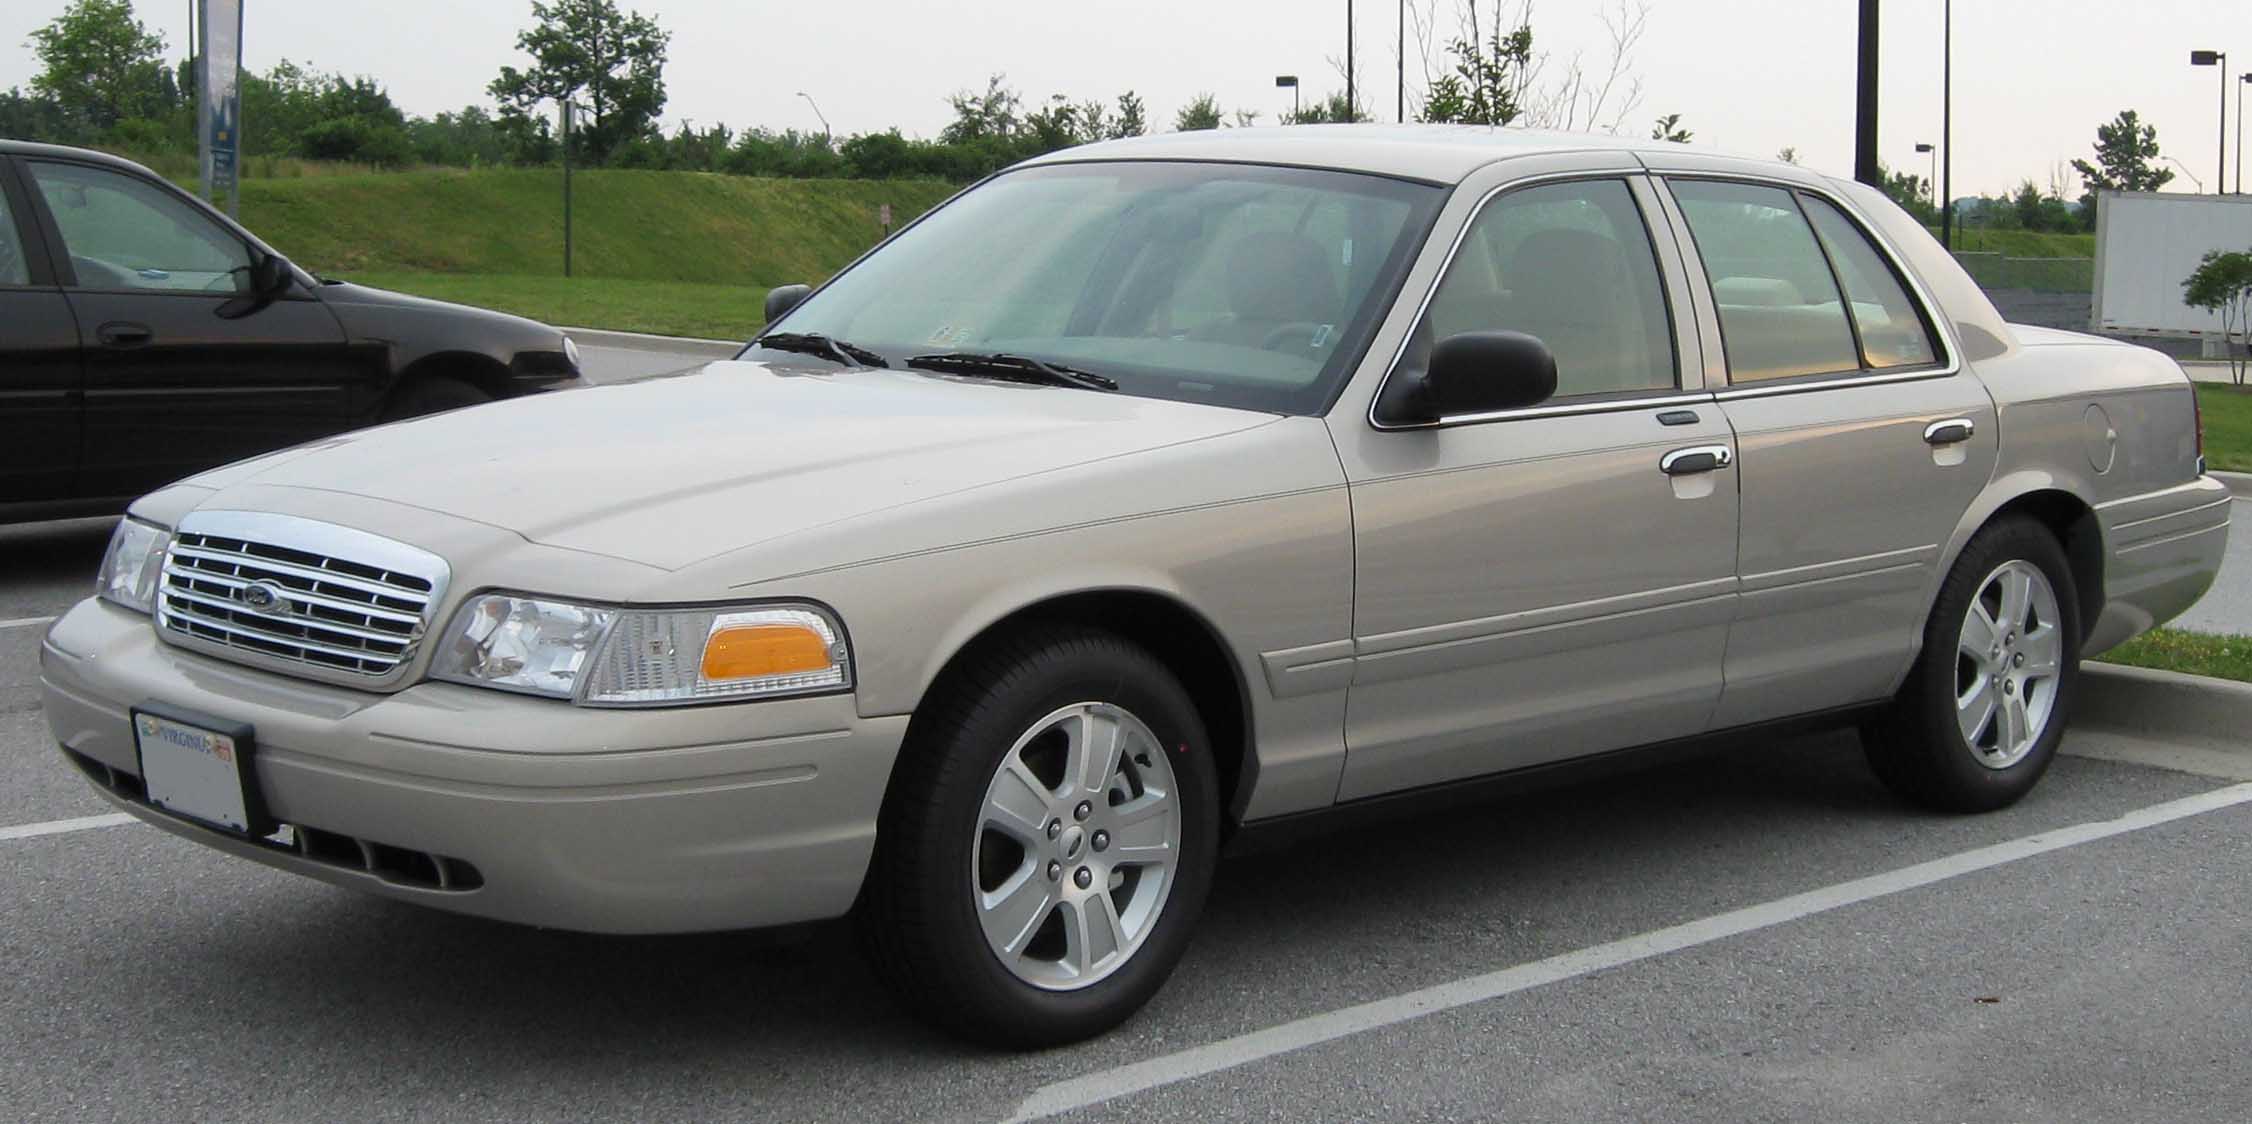 Ford Crown Victoria: 6 фото